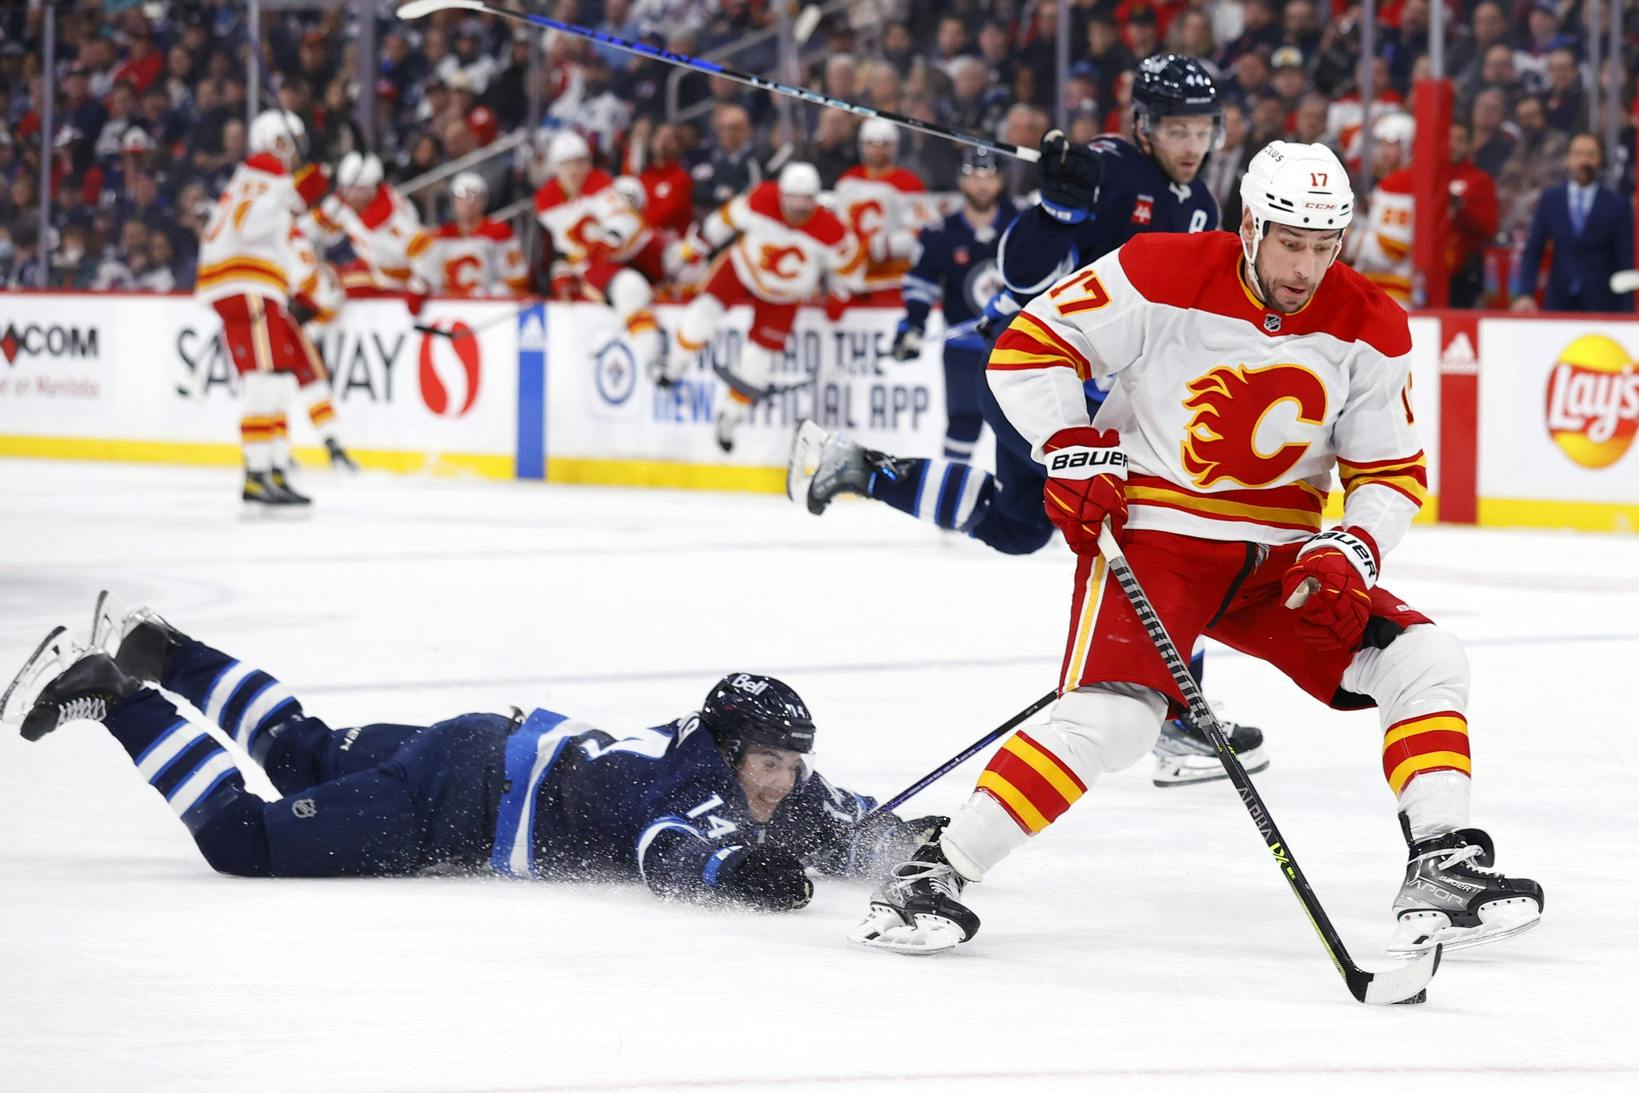 Report: Calgary Flames give pending UFA Milan Lucic permission to speak  with other teams - Daily Faceoff